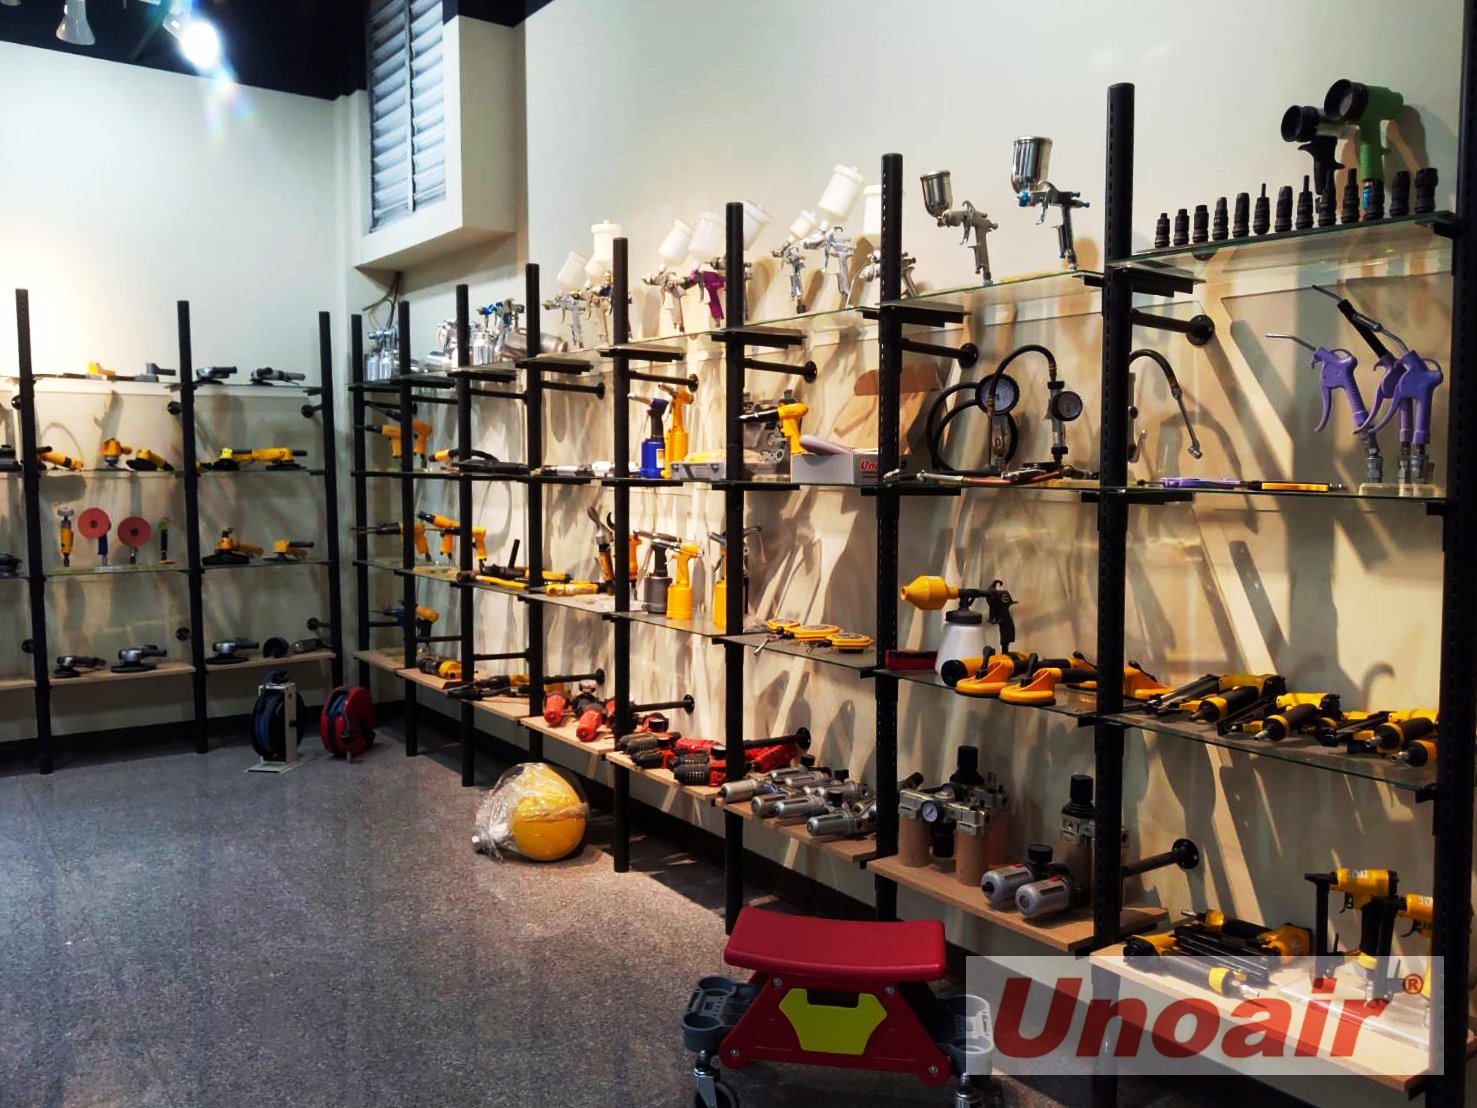 UNOAIR Weekly Update 09/23/2022 UNOAIR IS YOUR RELIABLE PARTNER IN THE TOOL BUSINESS